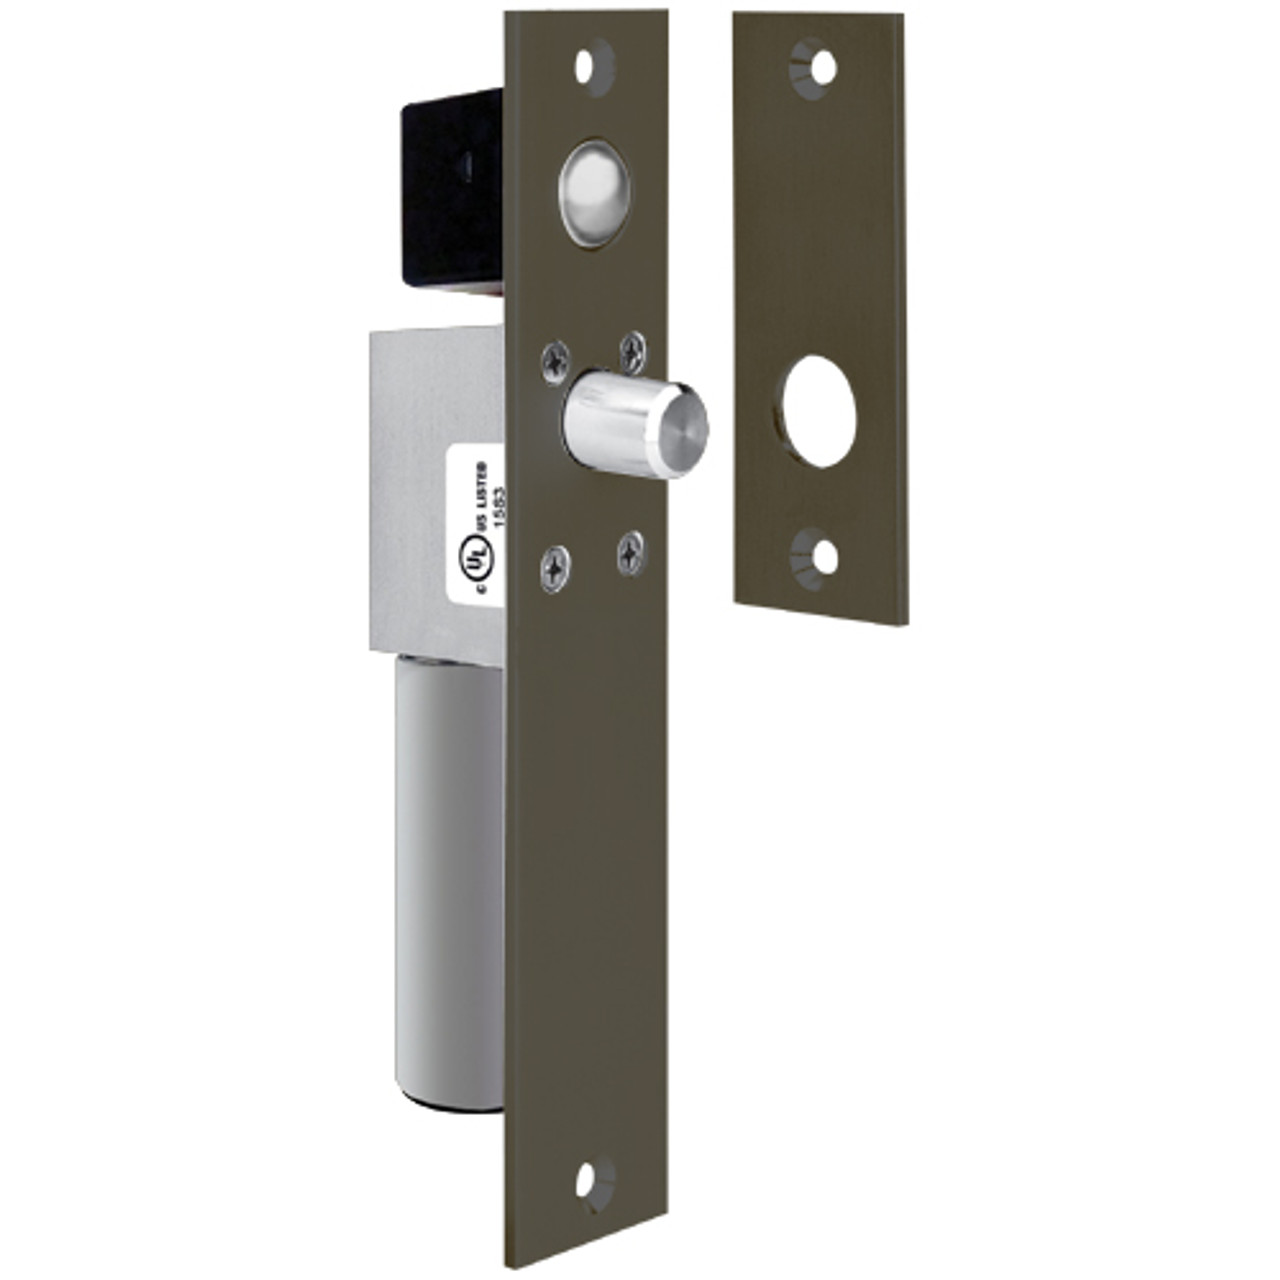 1490AIHD SDC Fits 1-1/2 inche Frame Non UL FailSafe Spacesaver Mortise Bolt Lock with Door Position Sensor in Oil Rubbed Bronze